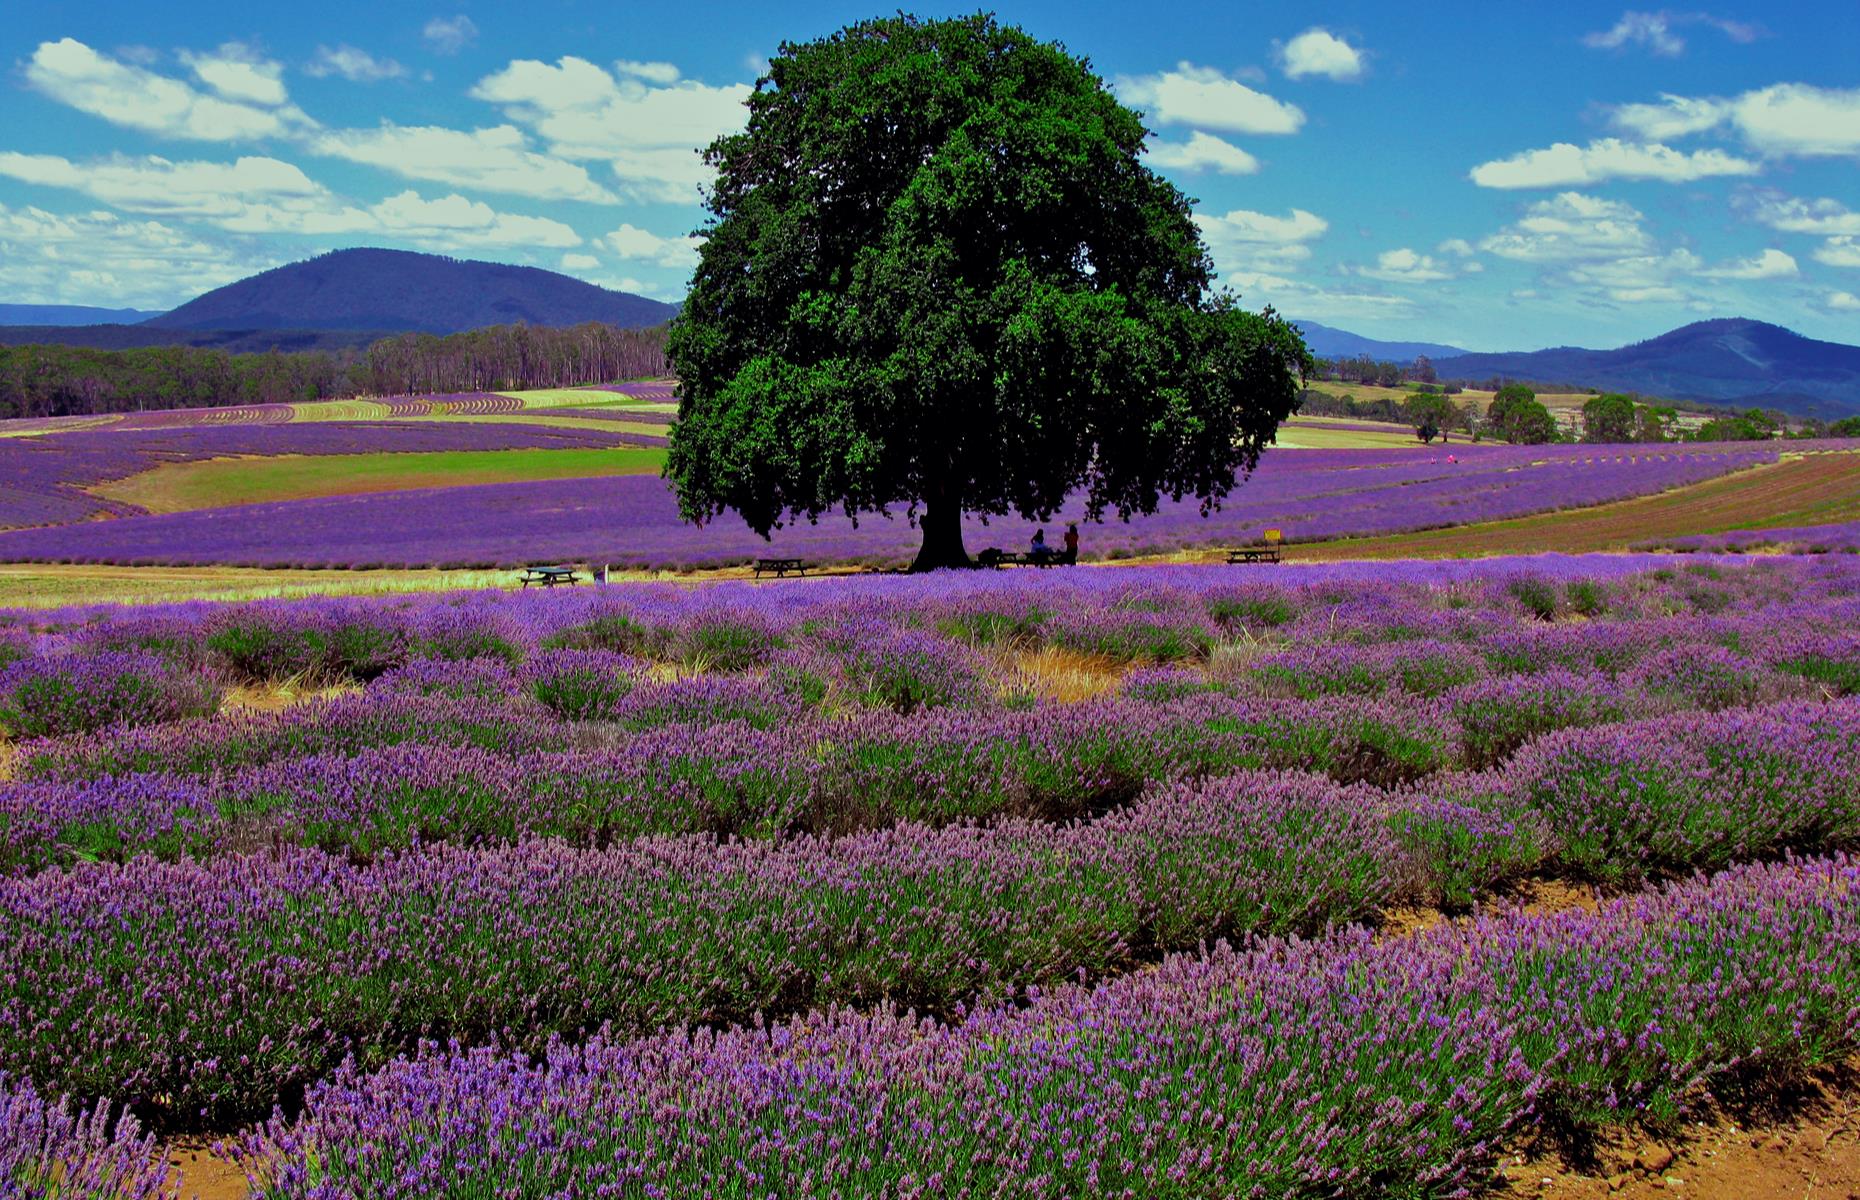 <p>Provence should watch its step. Bridestowe Estate is the largest lavender farm in the Southern Hemisphere and is a spectacular sight (and scent) between December and early February, when the purple flowers bloom. Located in northeast Tasmania, the dazzling display is made all the more striking by the red earth that peeps through the curved rows of the lavender plants and the dramatic backdrop of Mount Arthur.</p>